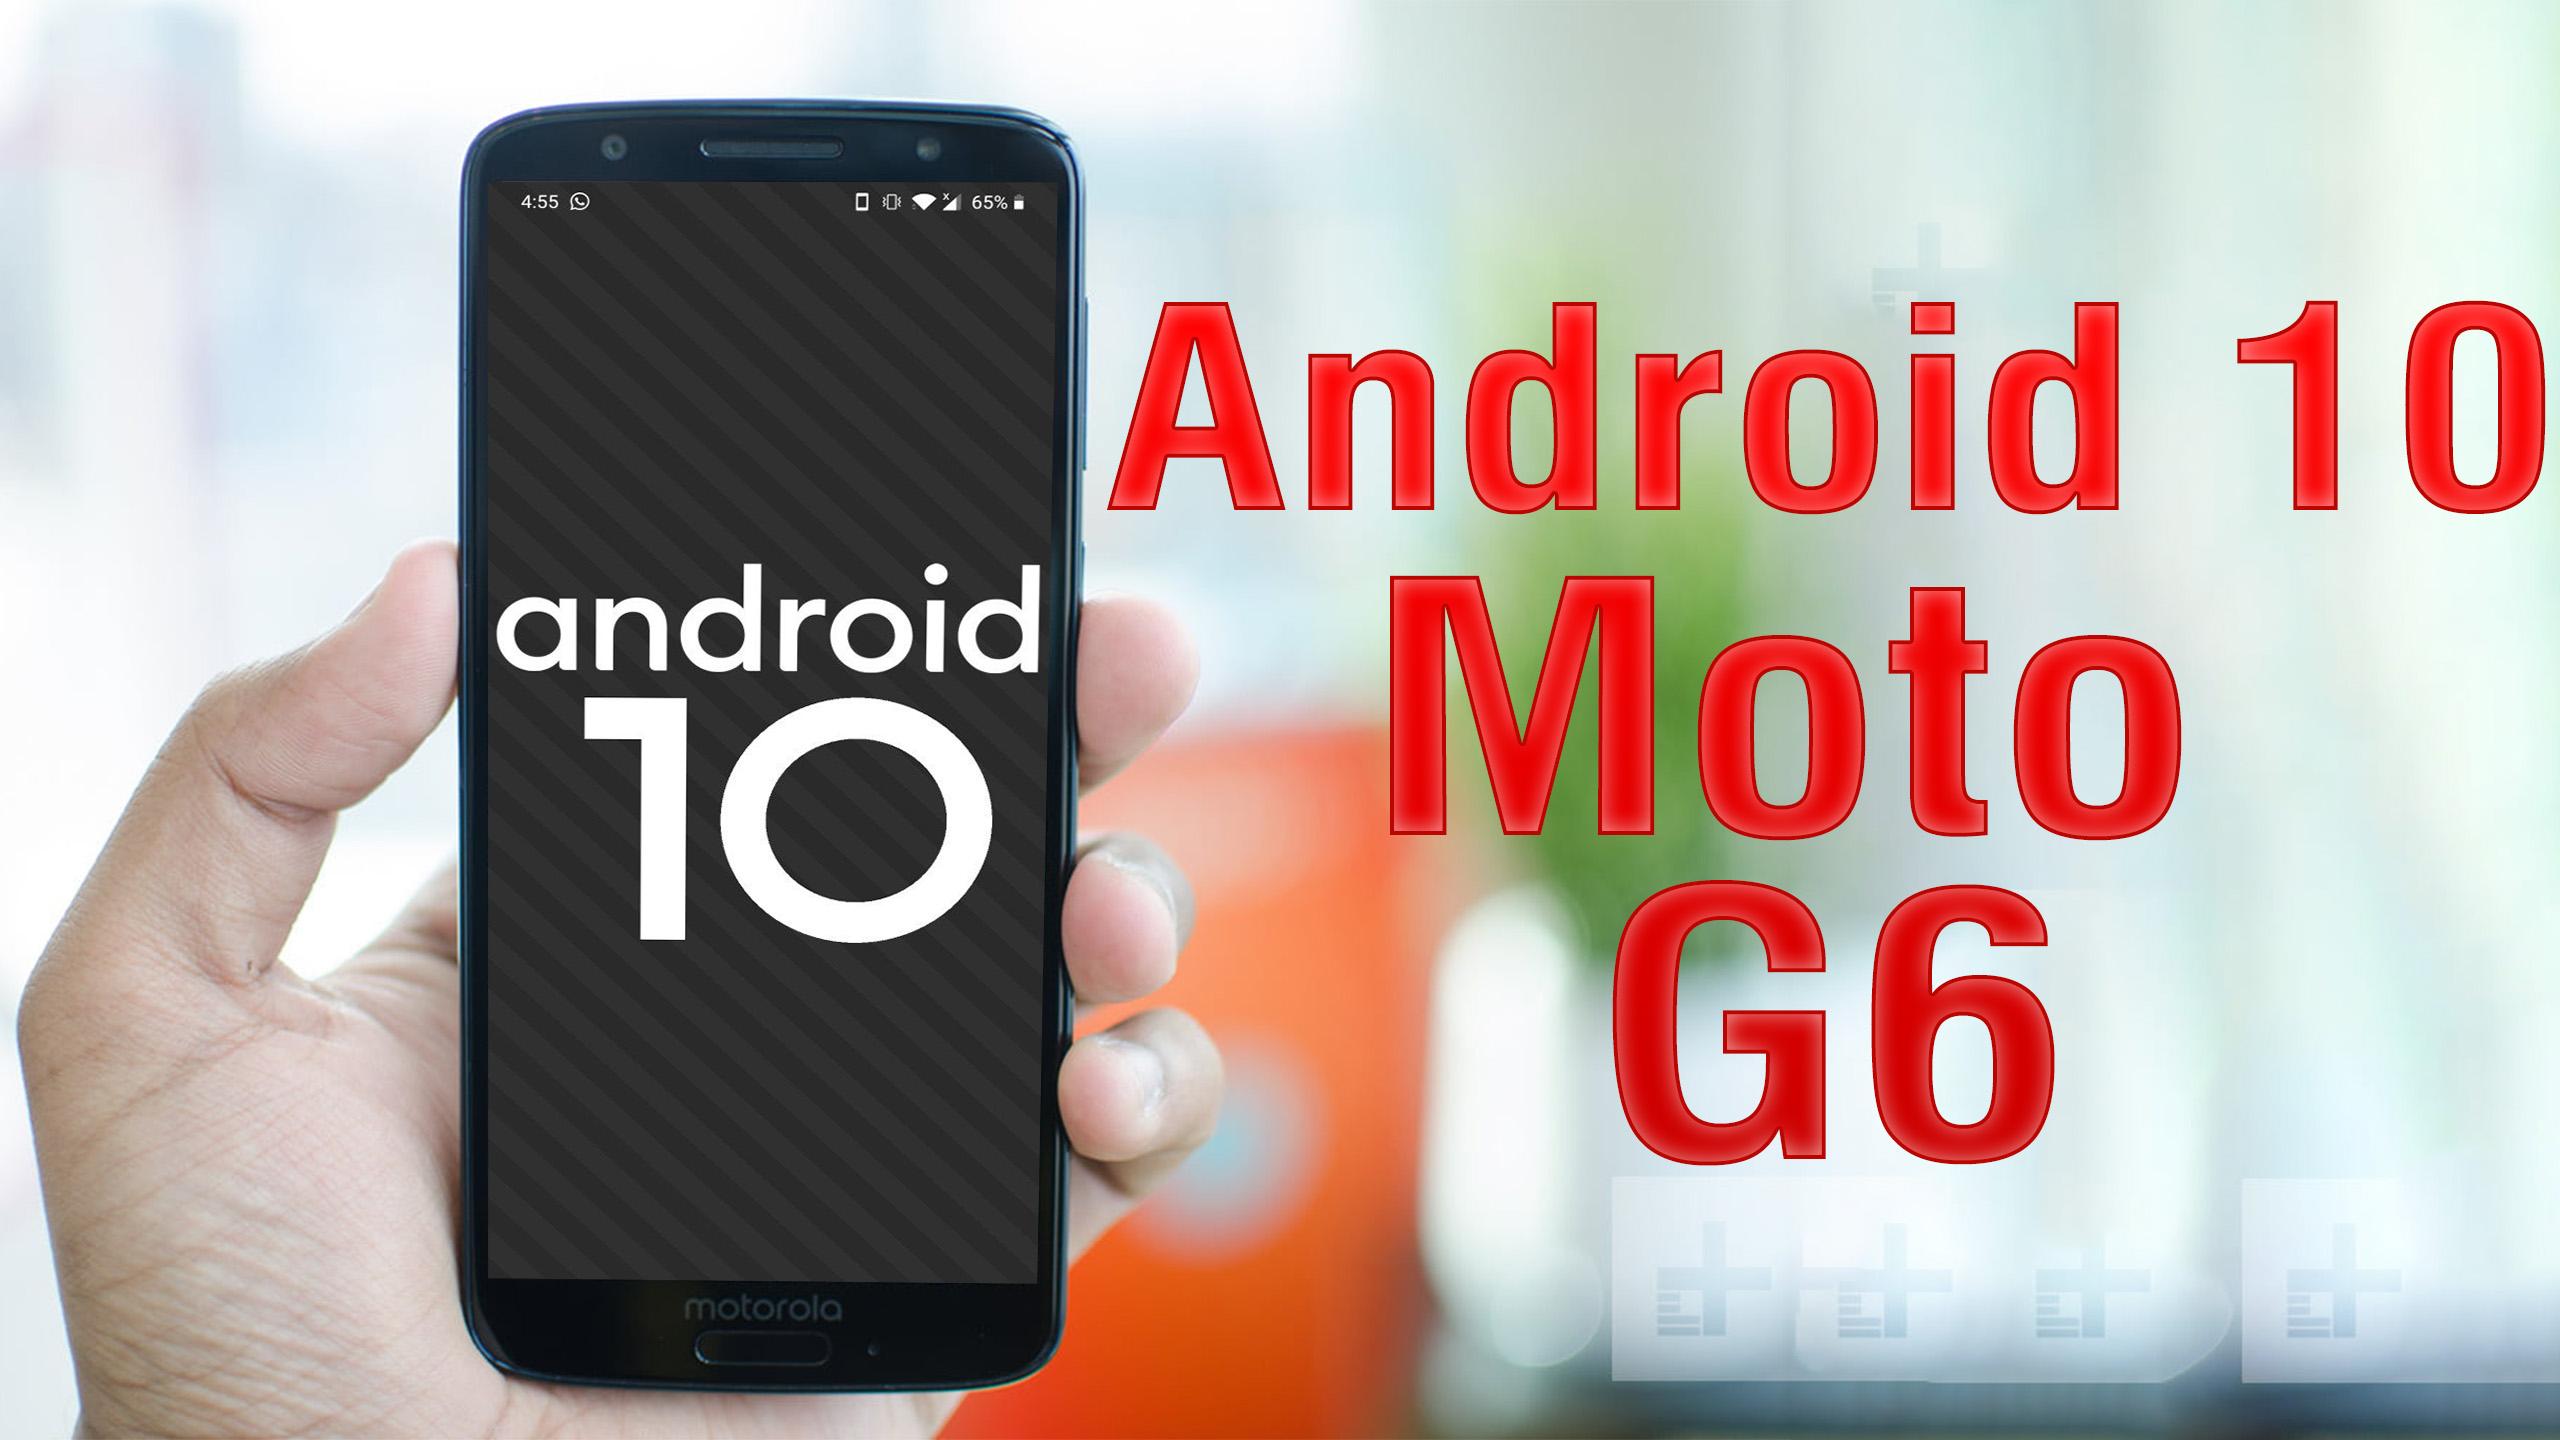 Install Android 10 On Moto G6 Lineageos 17 Gsi Treble Rom How To Guide The Upgrade Guide